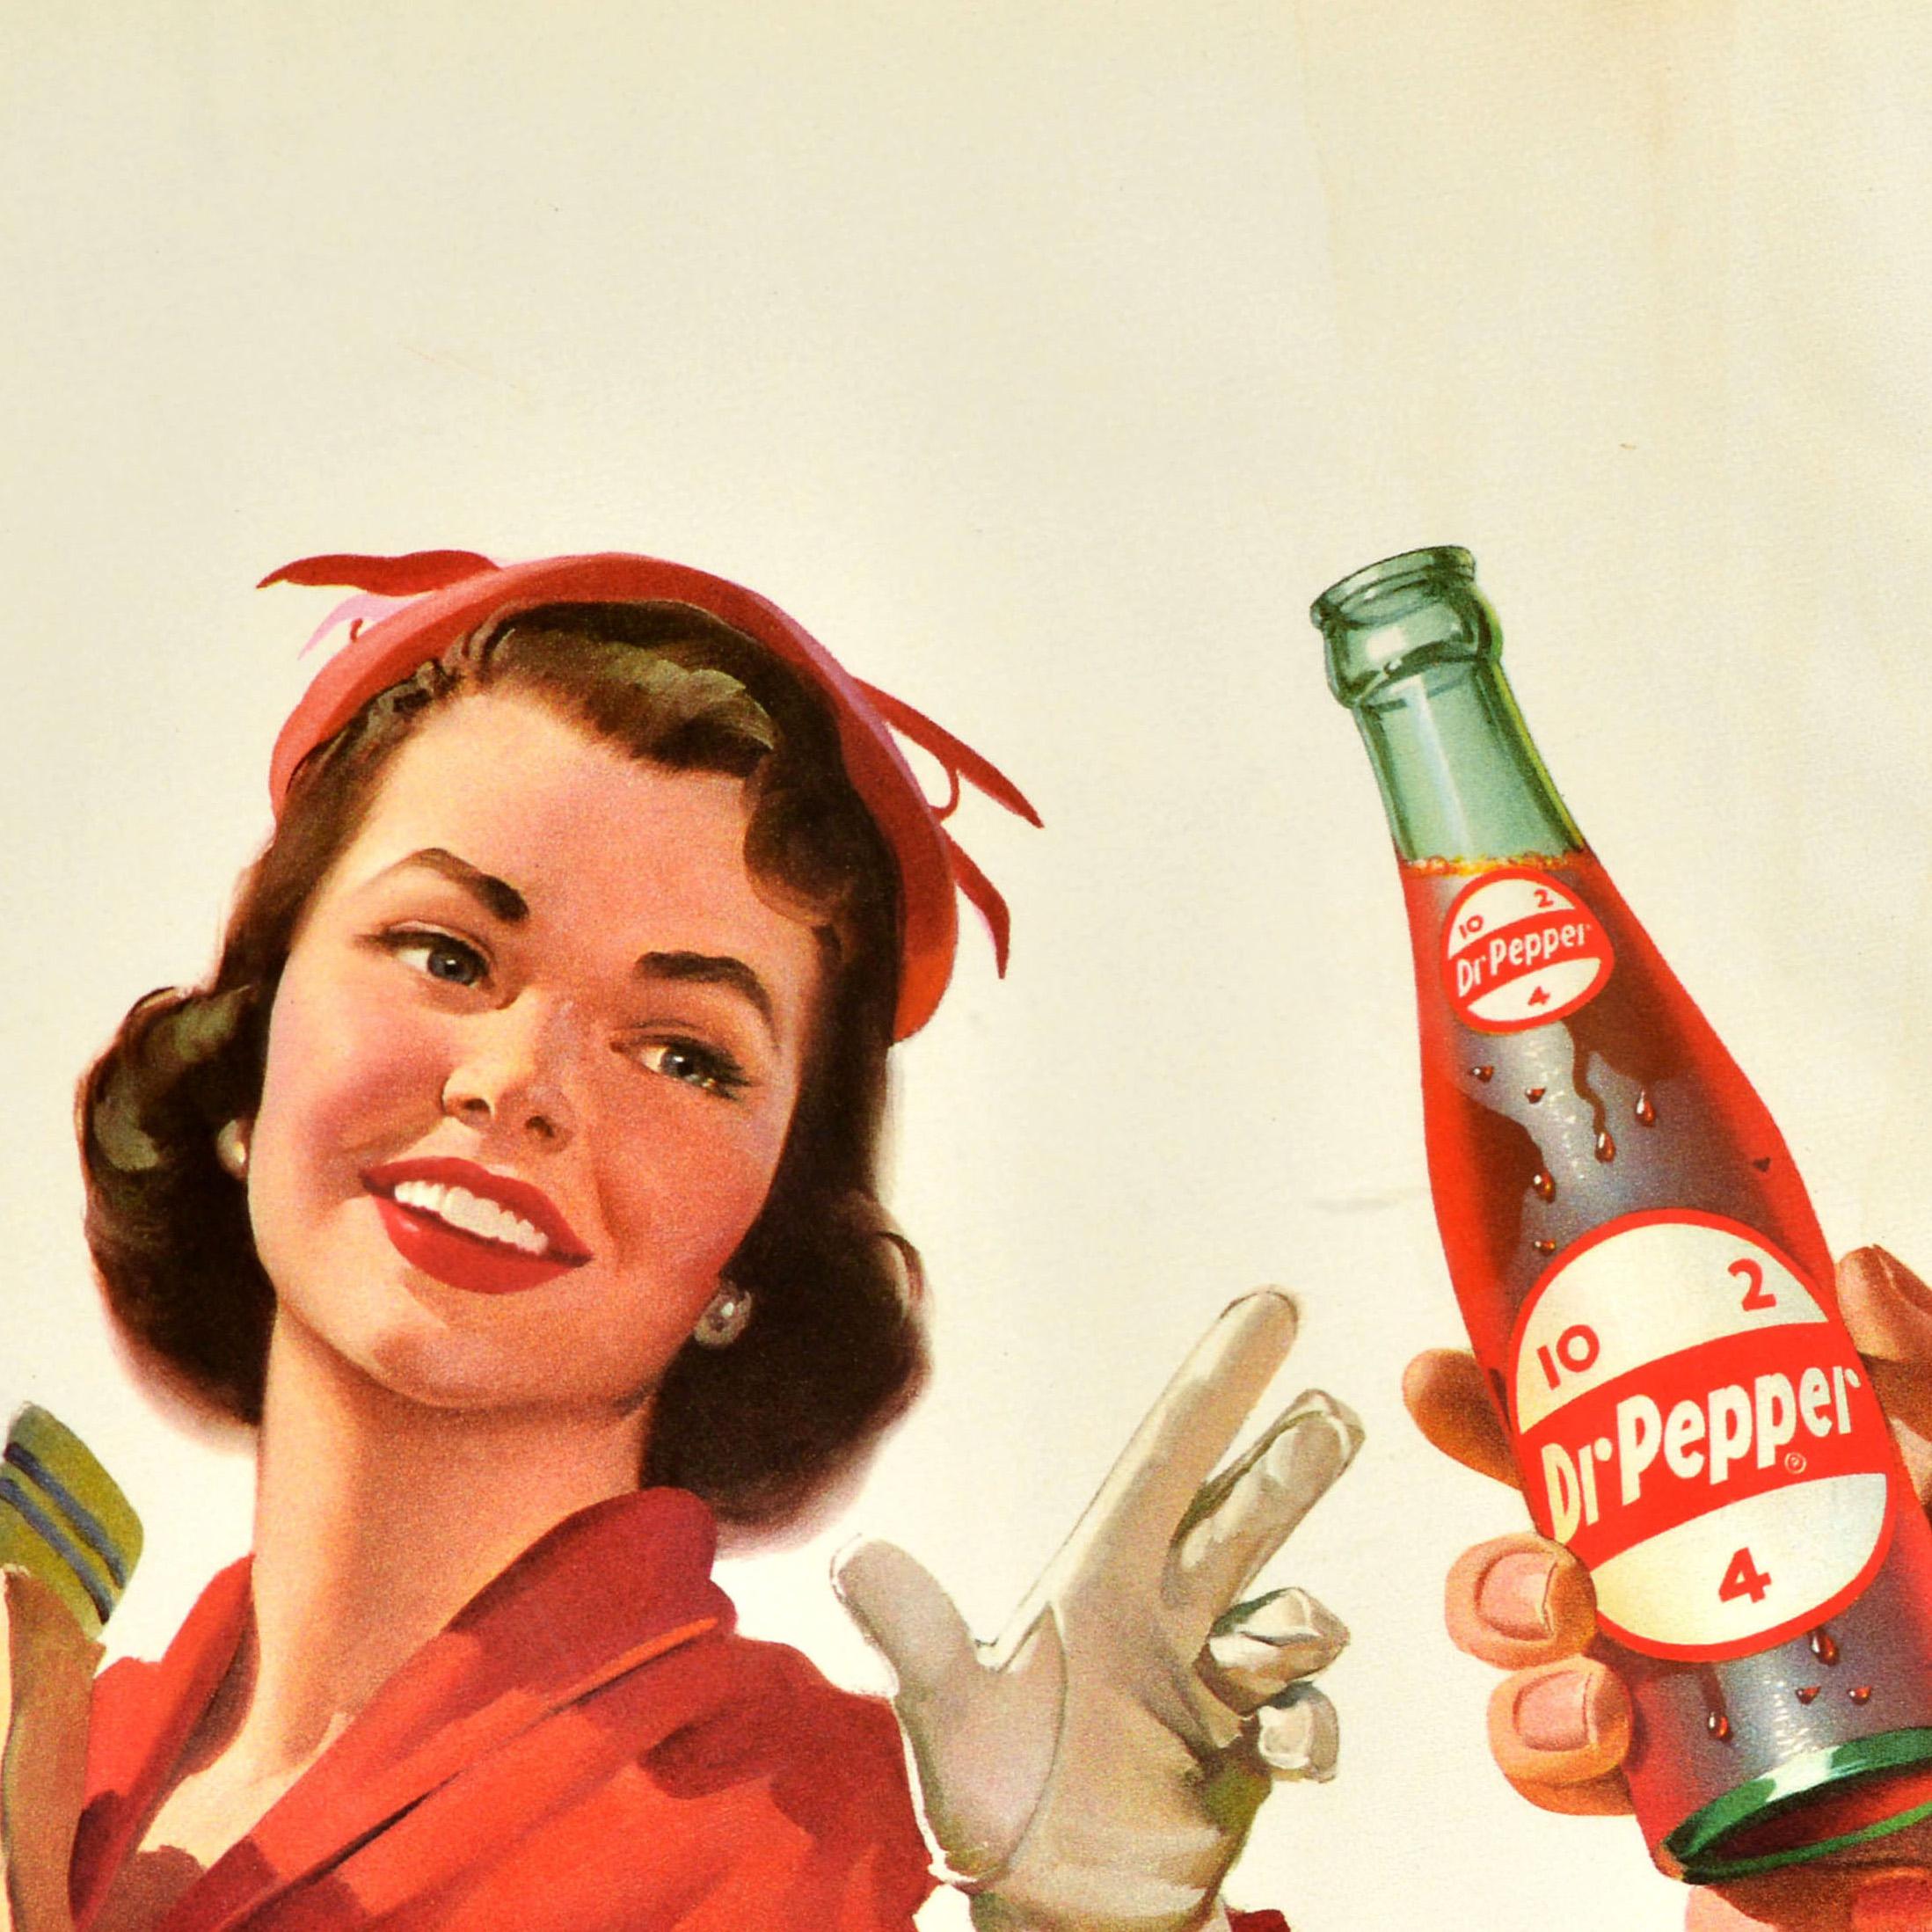 Original vintage soft drink advertising poster for Dr Pepper - frosty, man - frosty! The friendly 